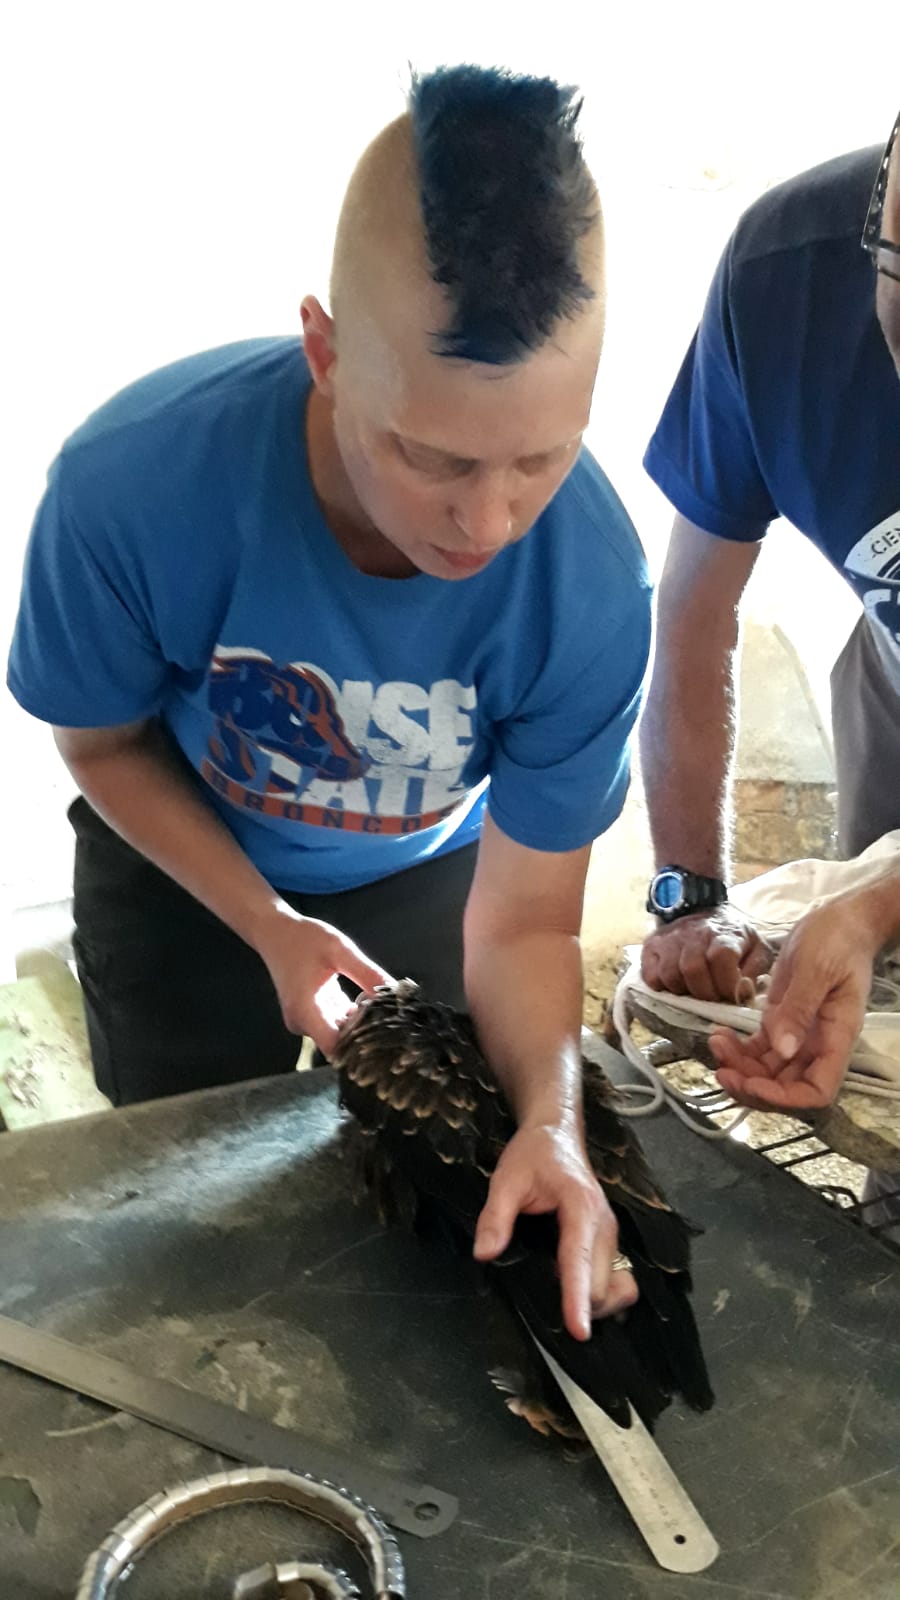 a scientist wearing a boise state shirt uses a ruler to measure the folded wing of a raptor